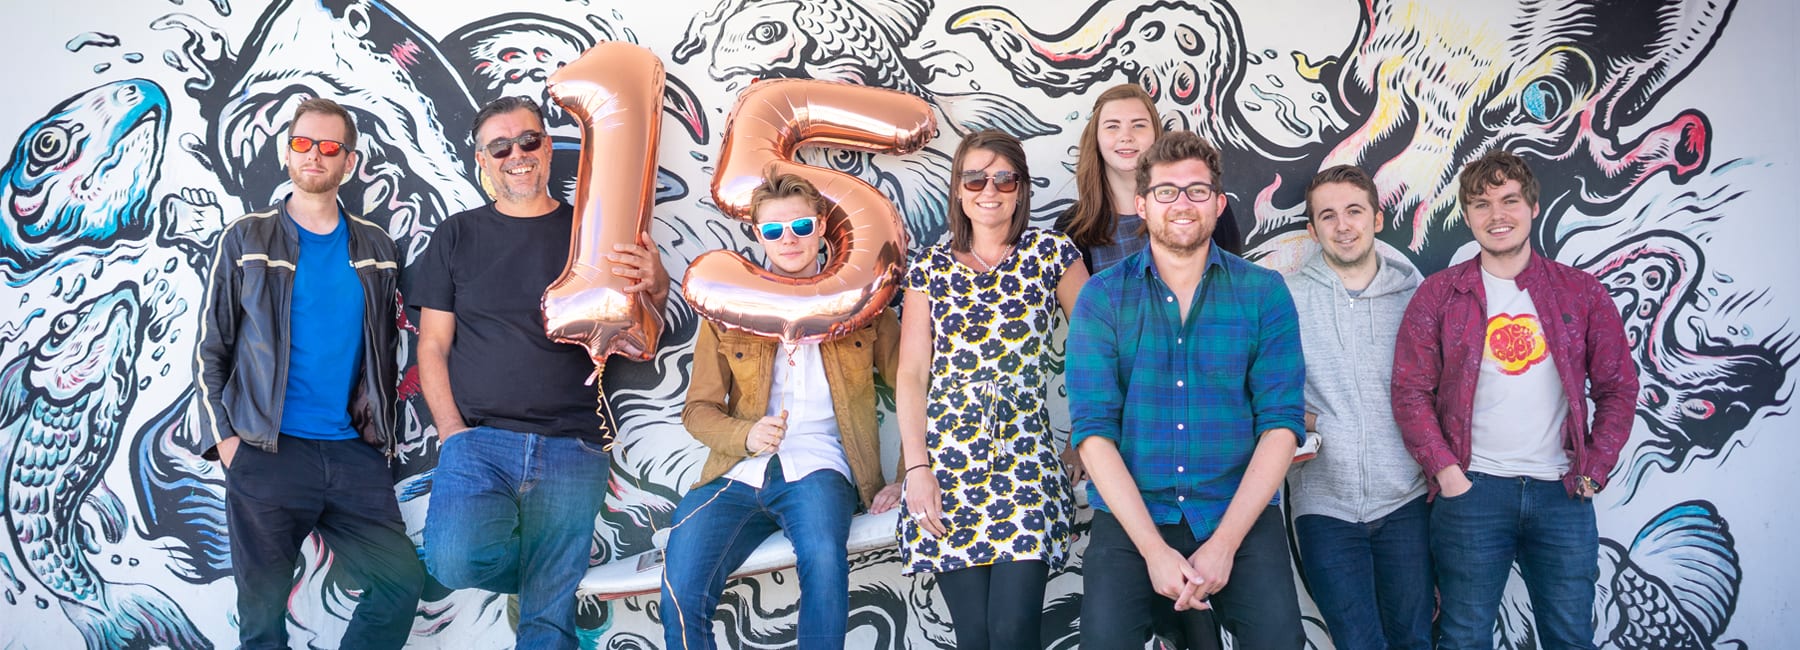 Digital Storm Team standing against a painted mural celebrating their anniversary with ballons